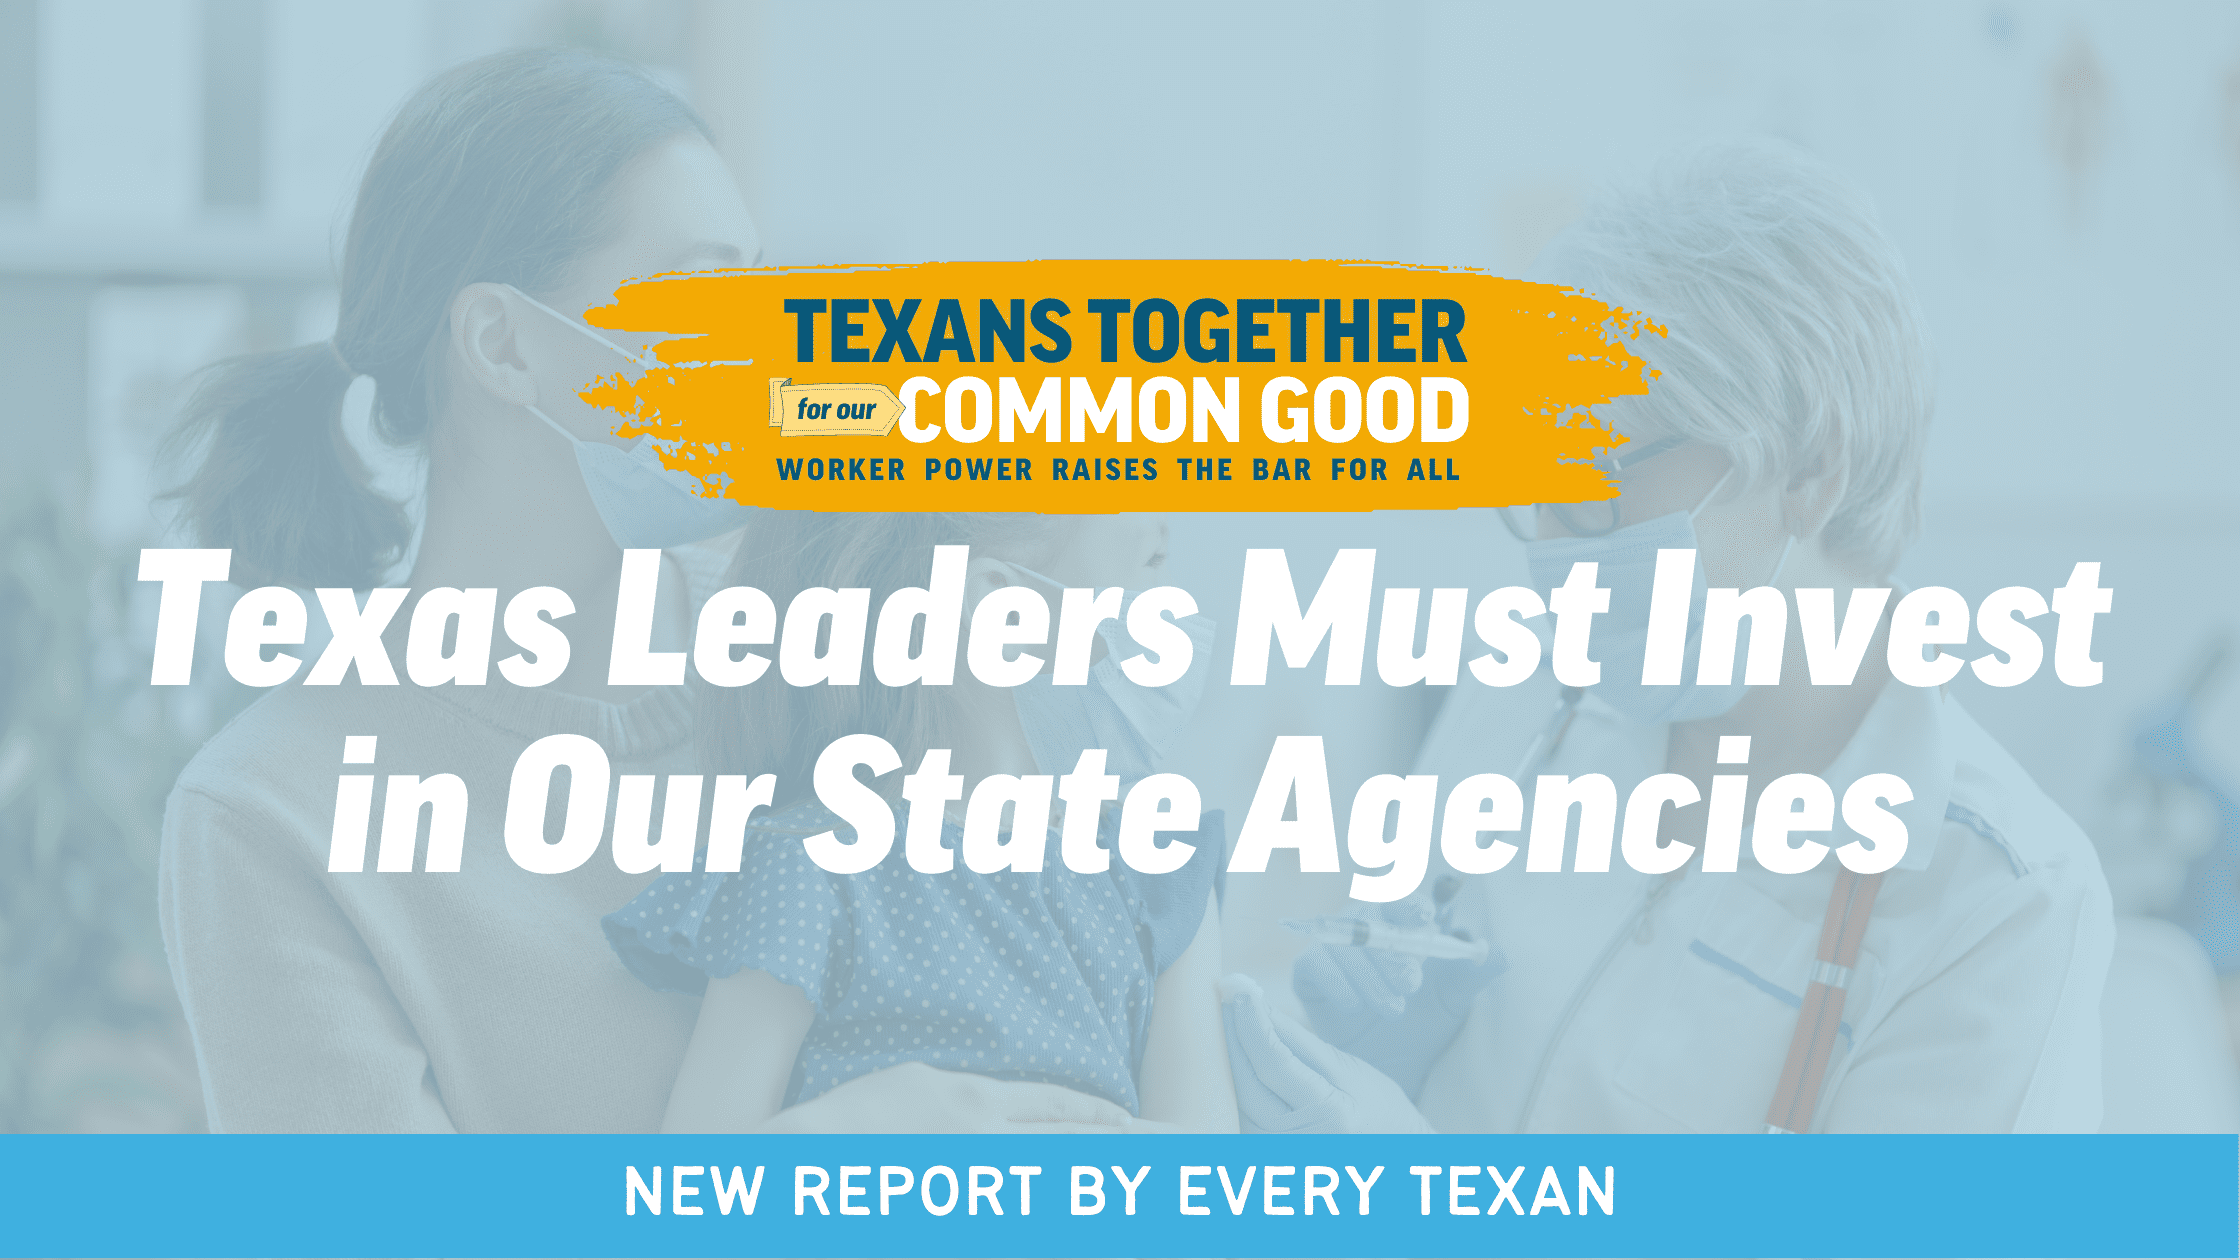 Texas Leaders Must Invest in Our State Agencies (Banner)